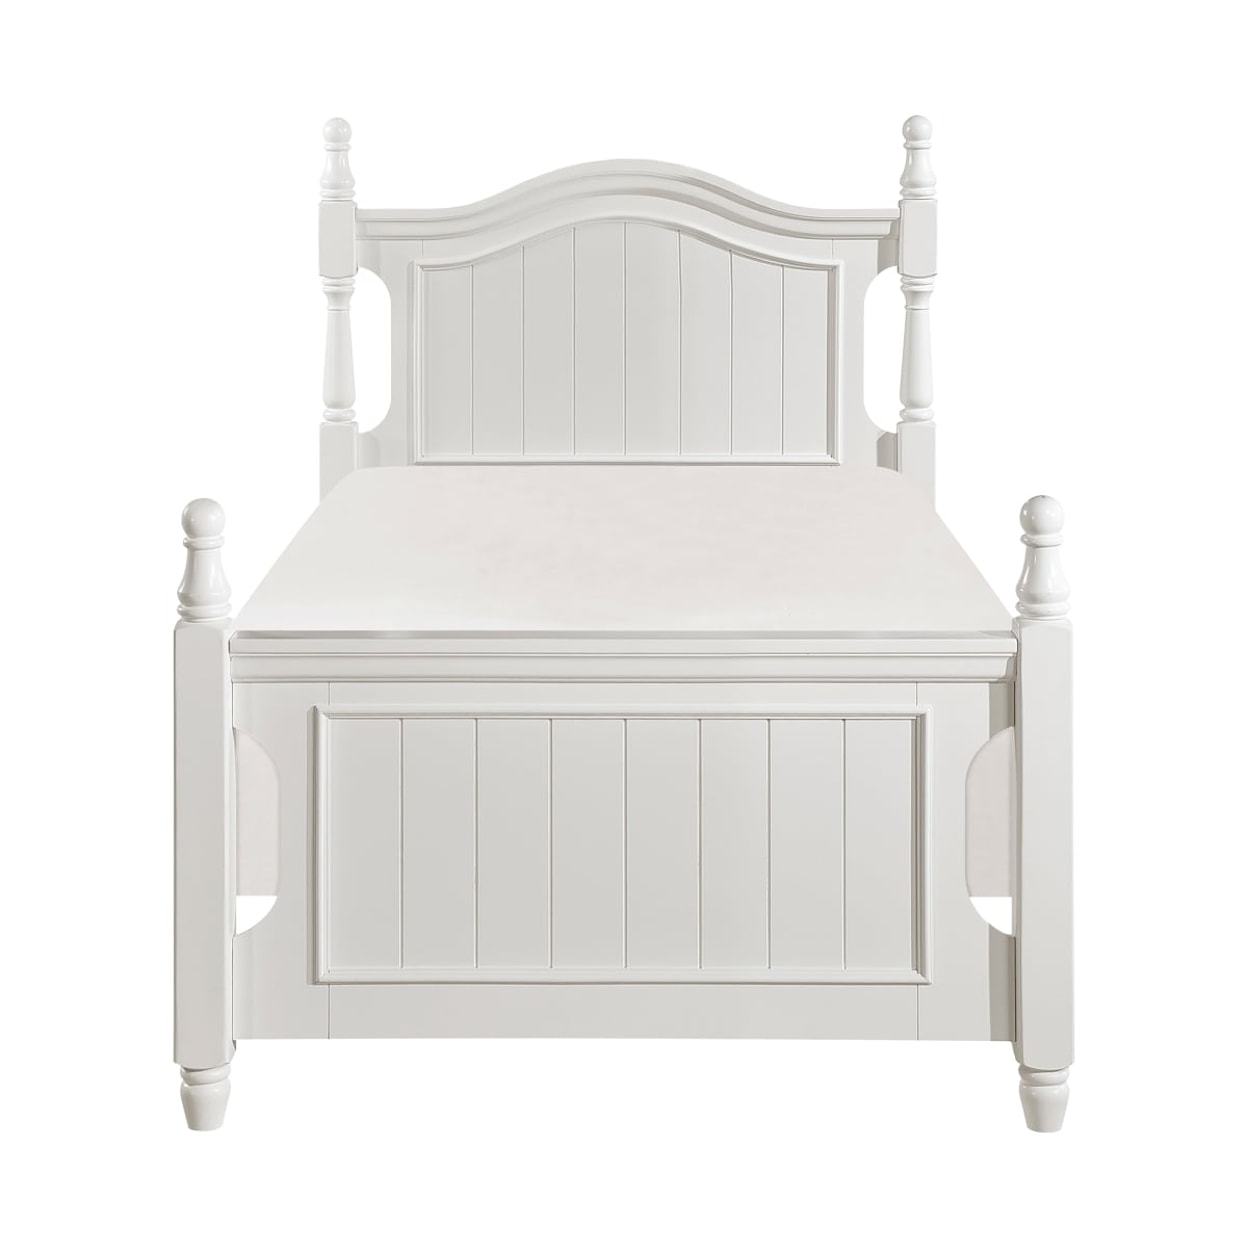 Homelegance Clementine Twin  Bed